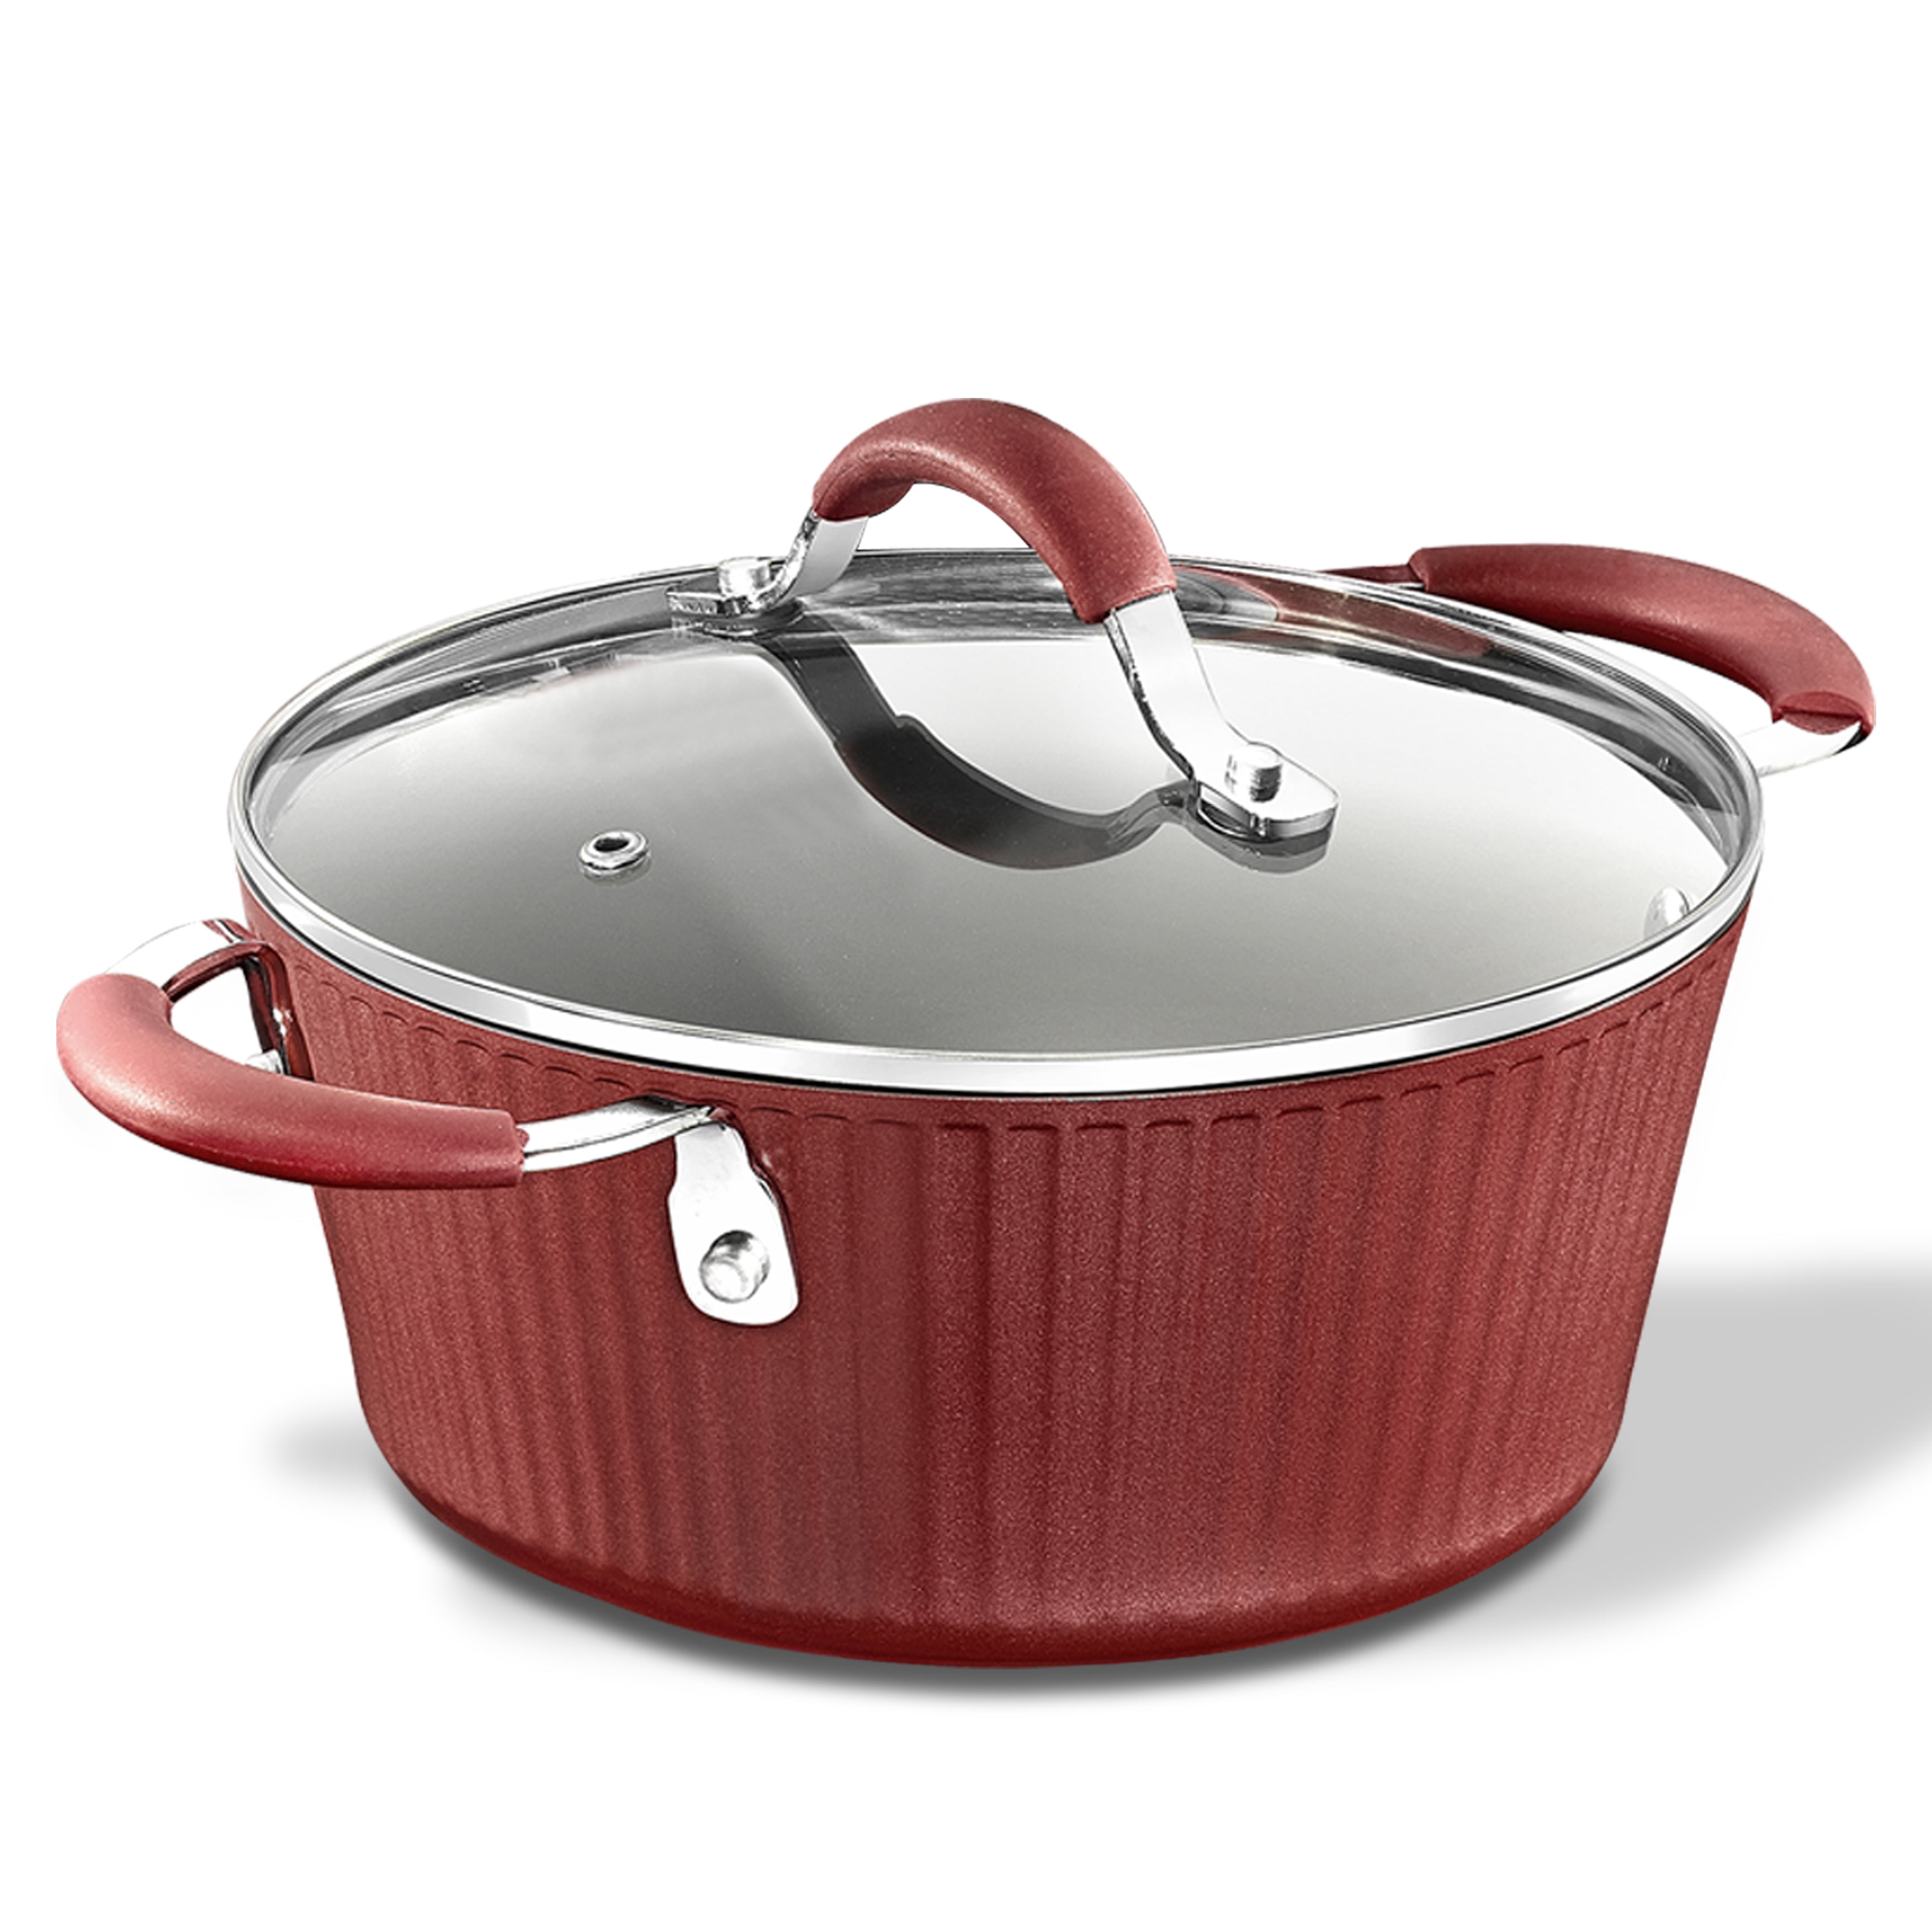 3.6 Quart Non-Stick High-Qualified Kitchen Cookware Dutch Oven Pot with Lid Works with Model: NCCW11BL